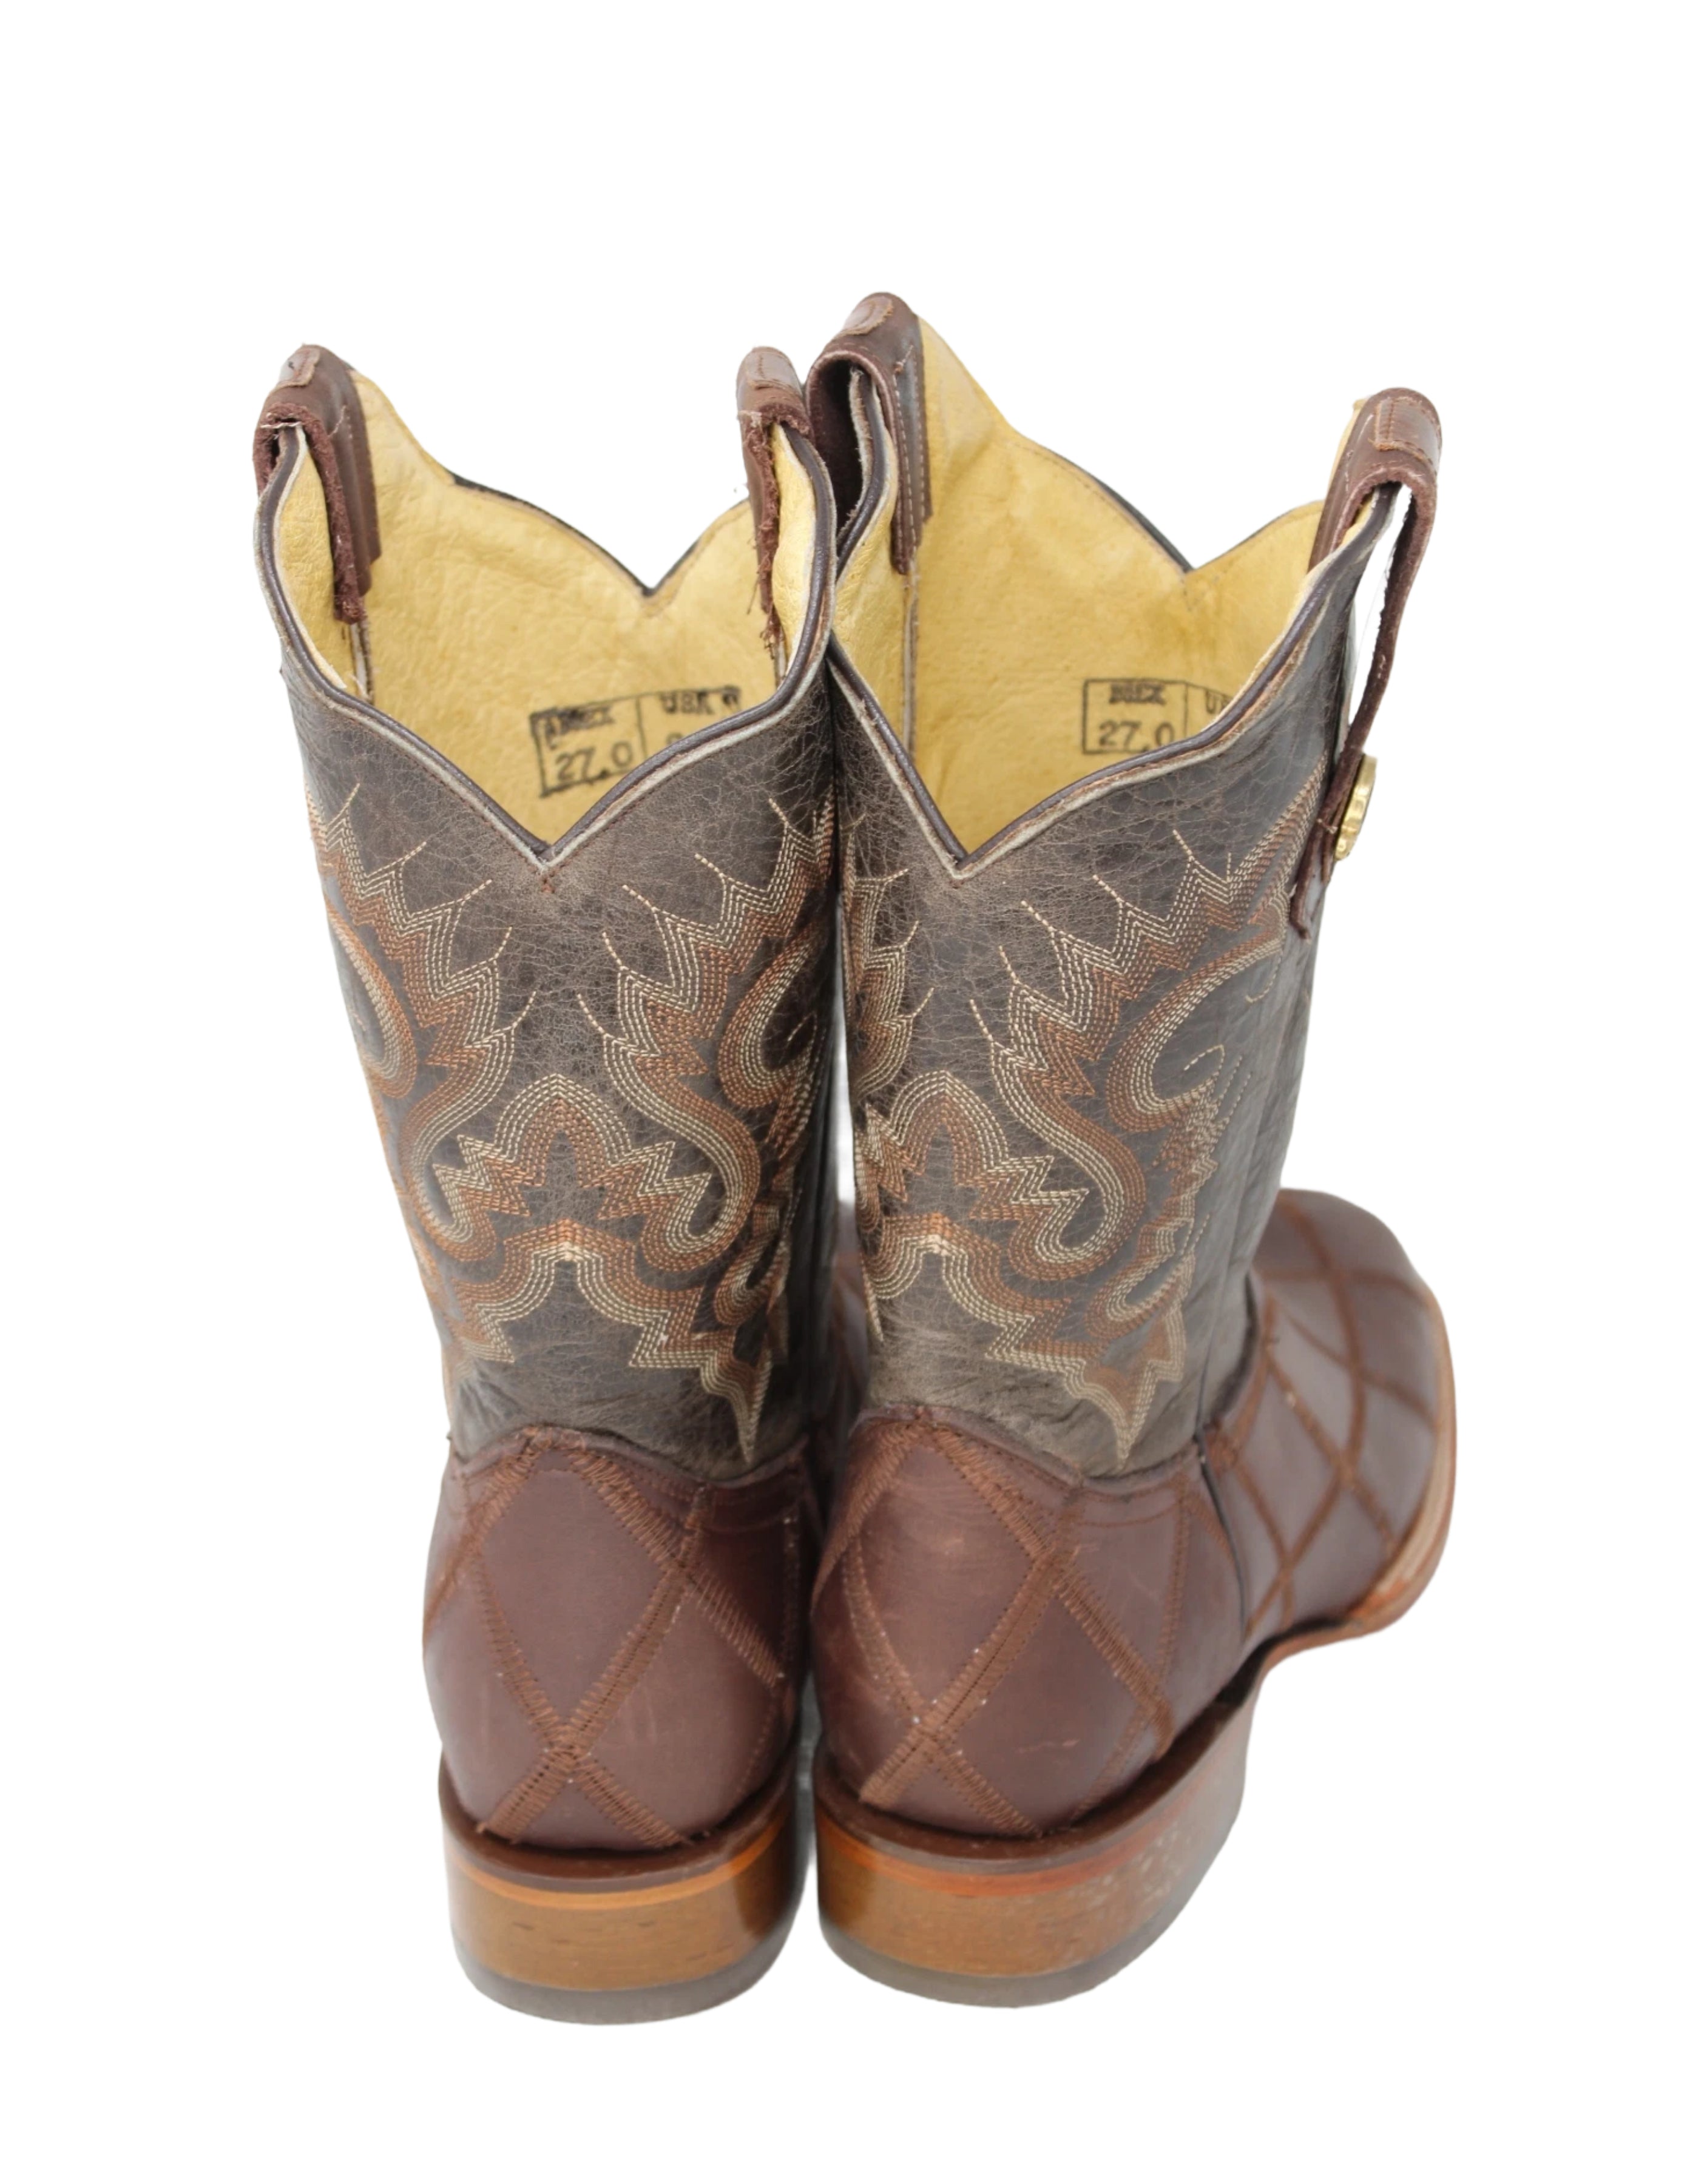 Chris Leather Cowboy Boot